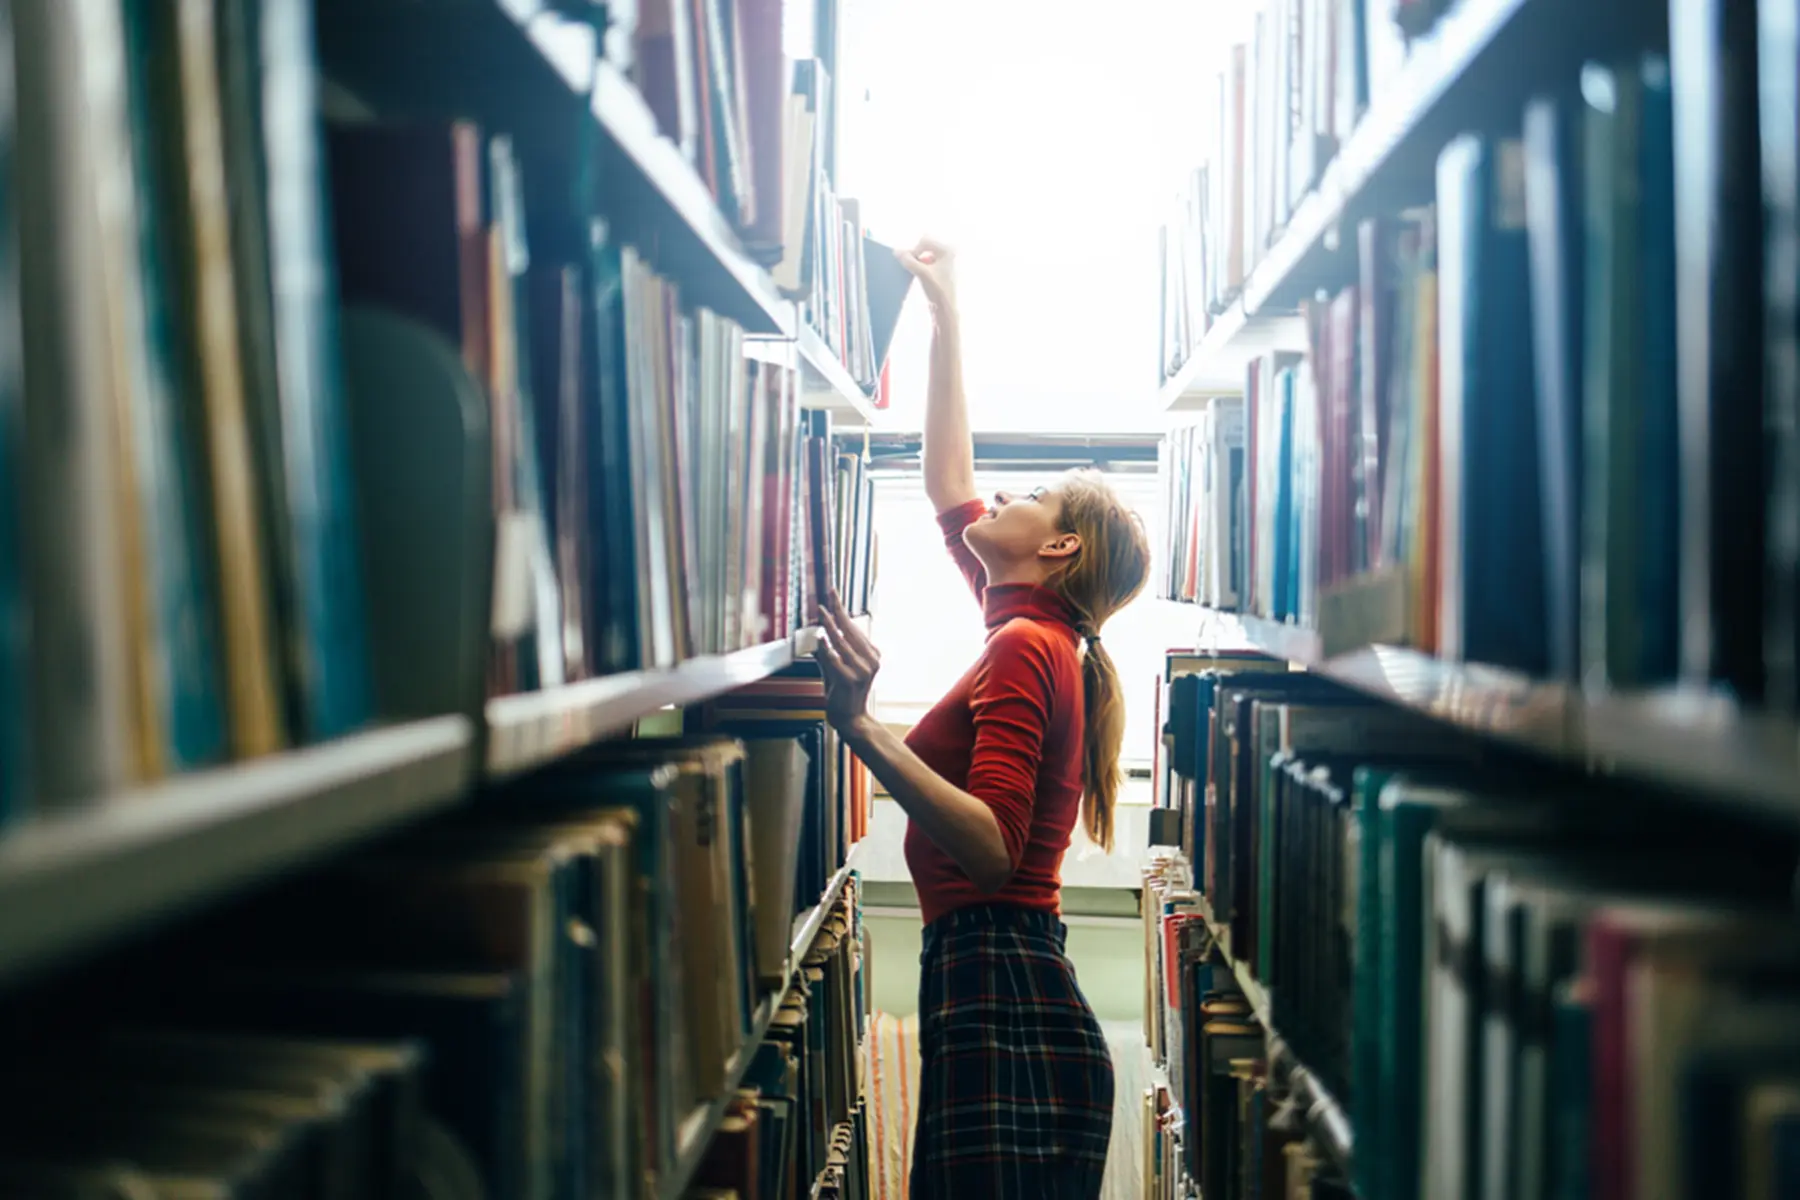 A librarian stand in the stacks and reaches up to grab a book.